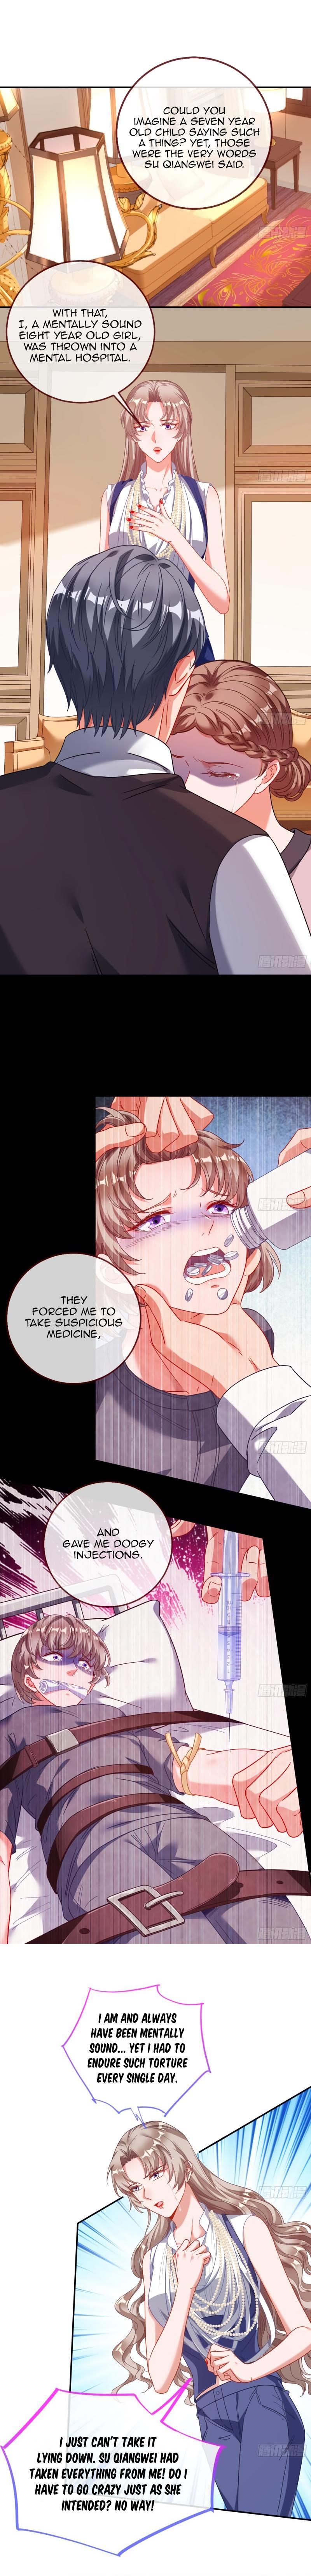 Cheating Men Must Die Vol.18 Chapter 400: The Real Heiress Wants To Make A Comeback - Overly Benevolent Father - Picture 2